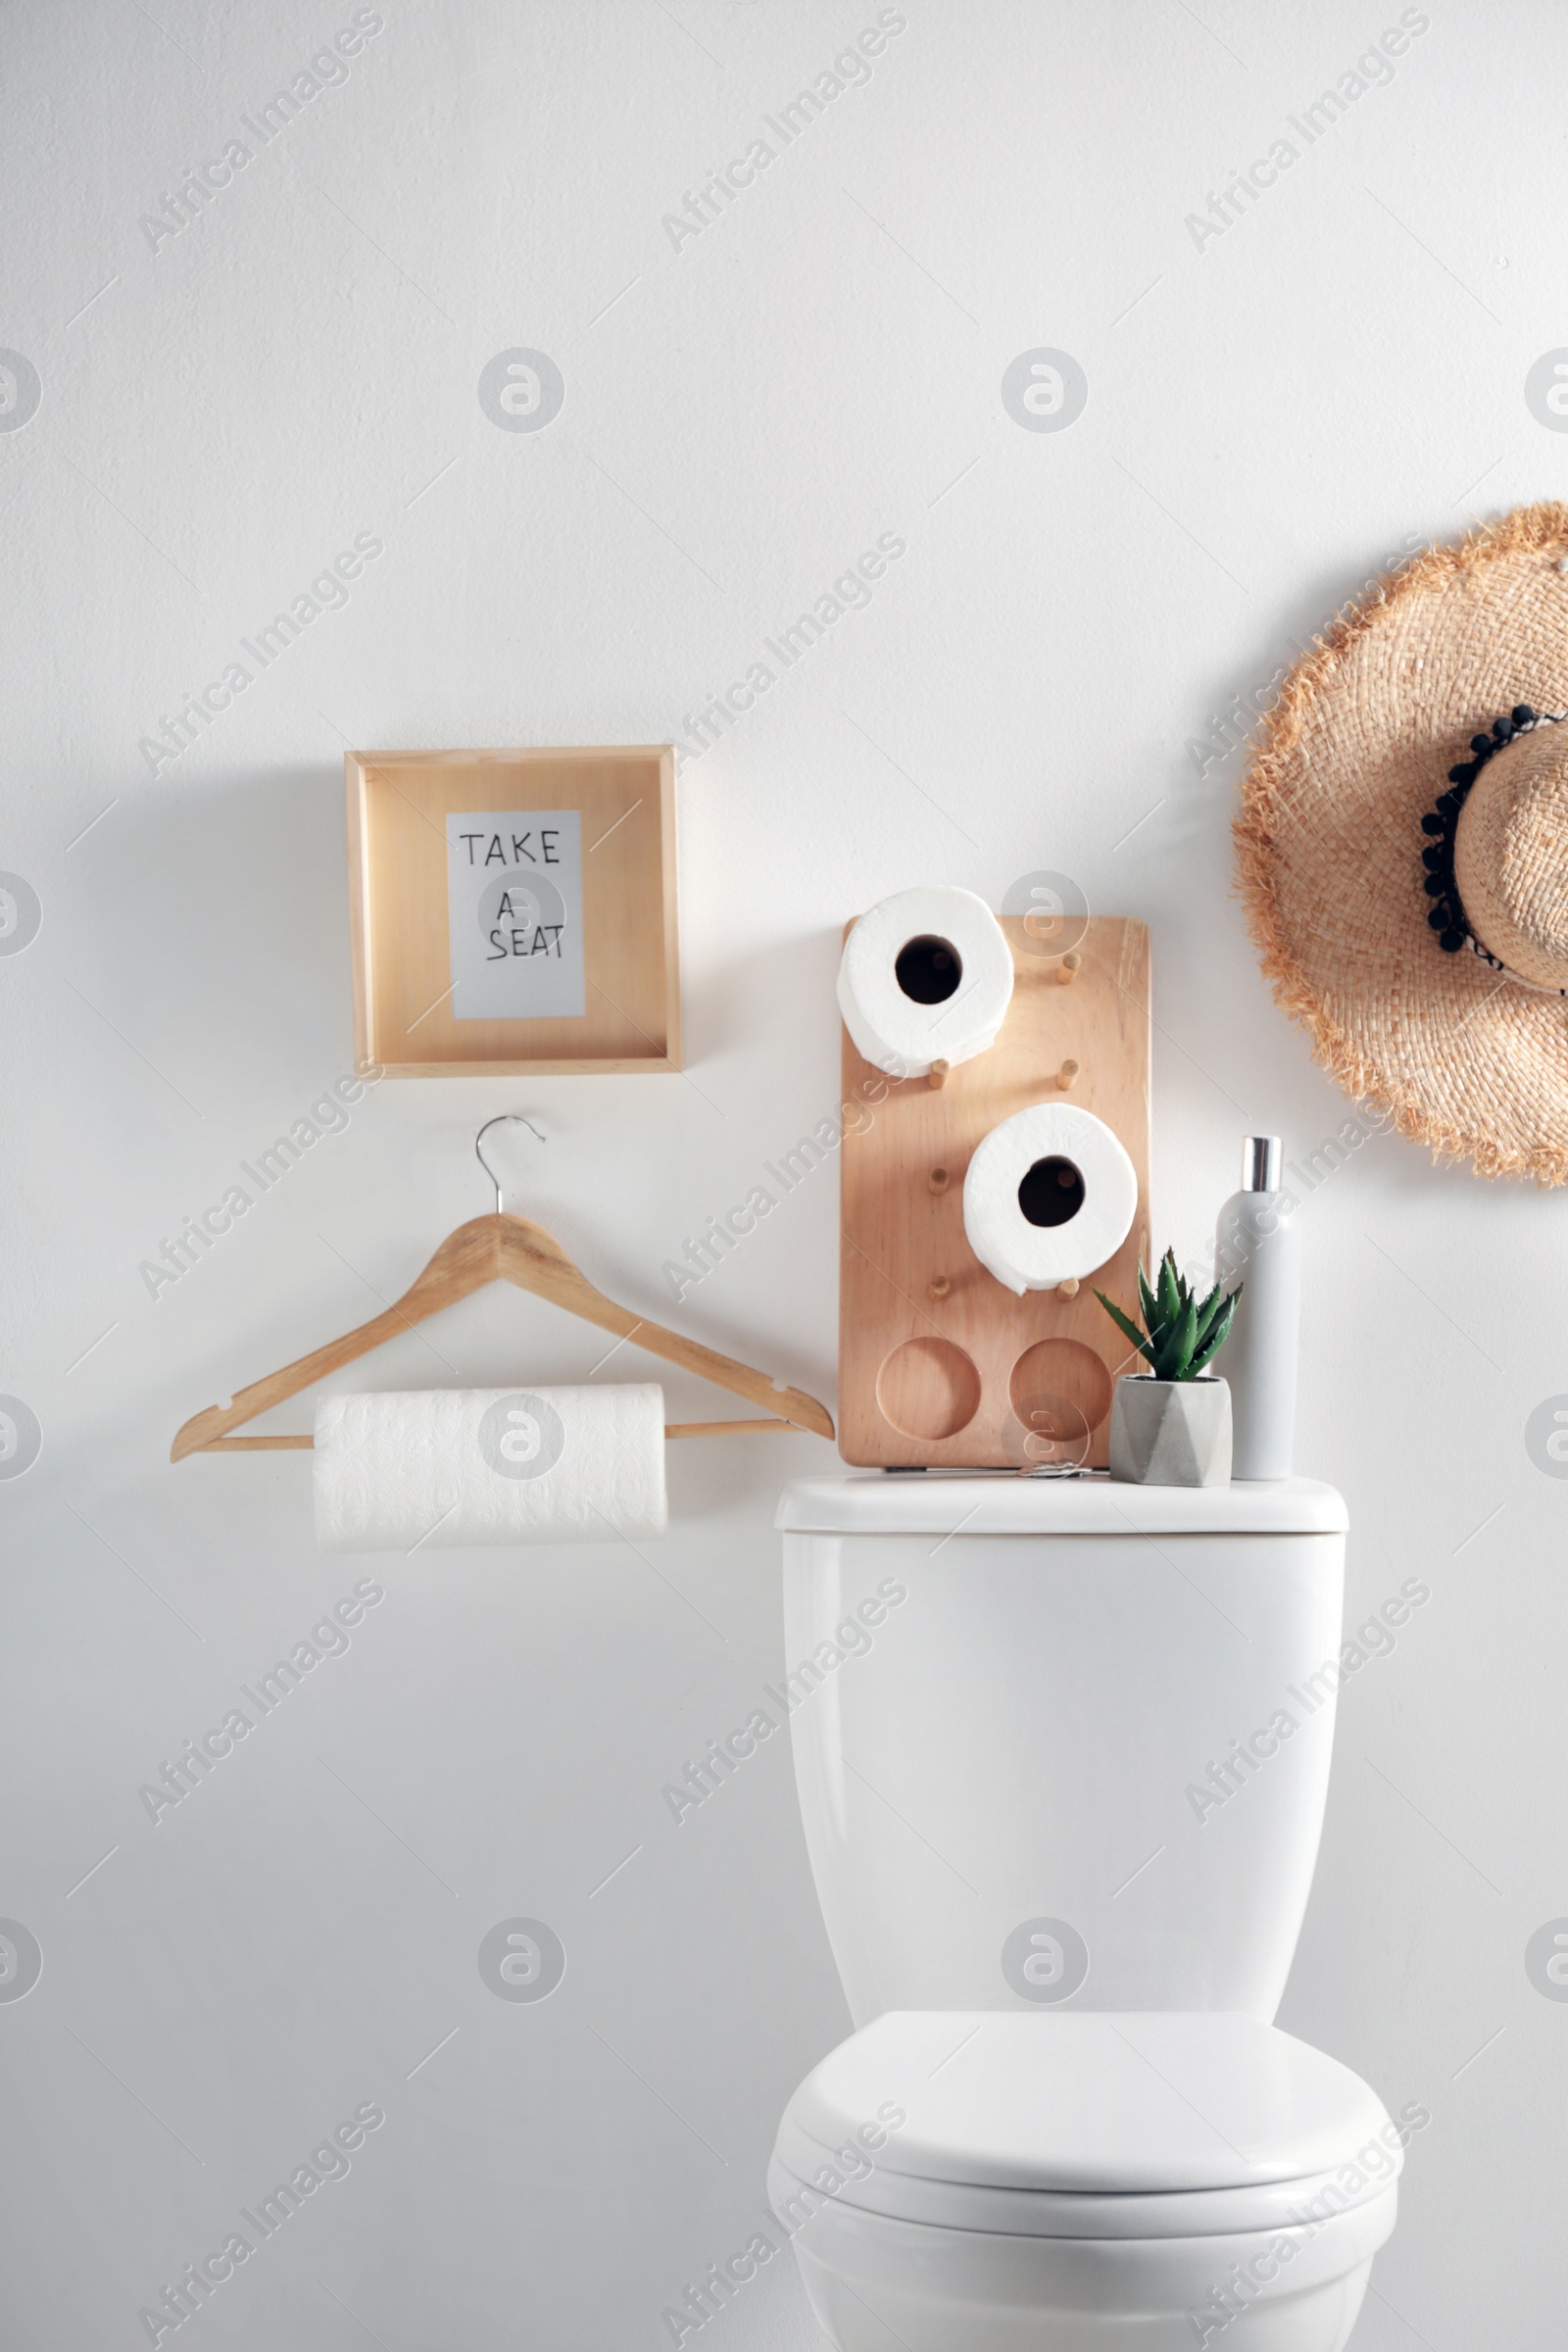 Photo of Decor elements, necessities and toilet bowl near white wall. Bathroom interior